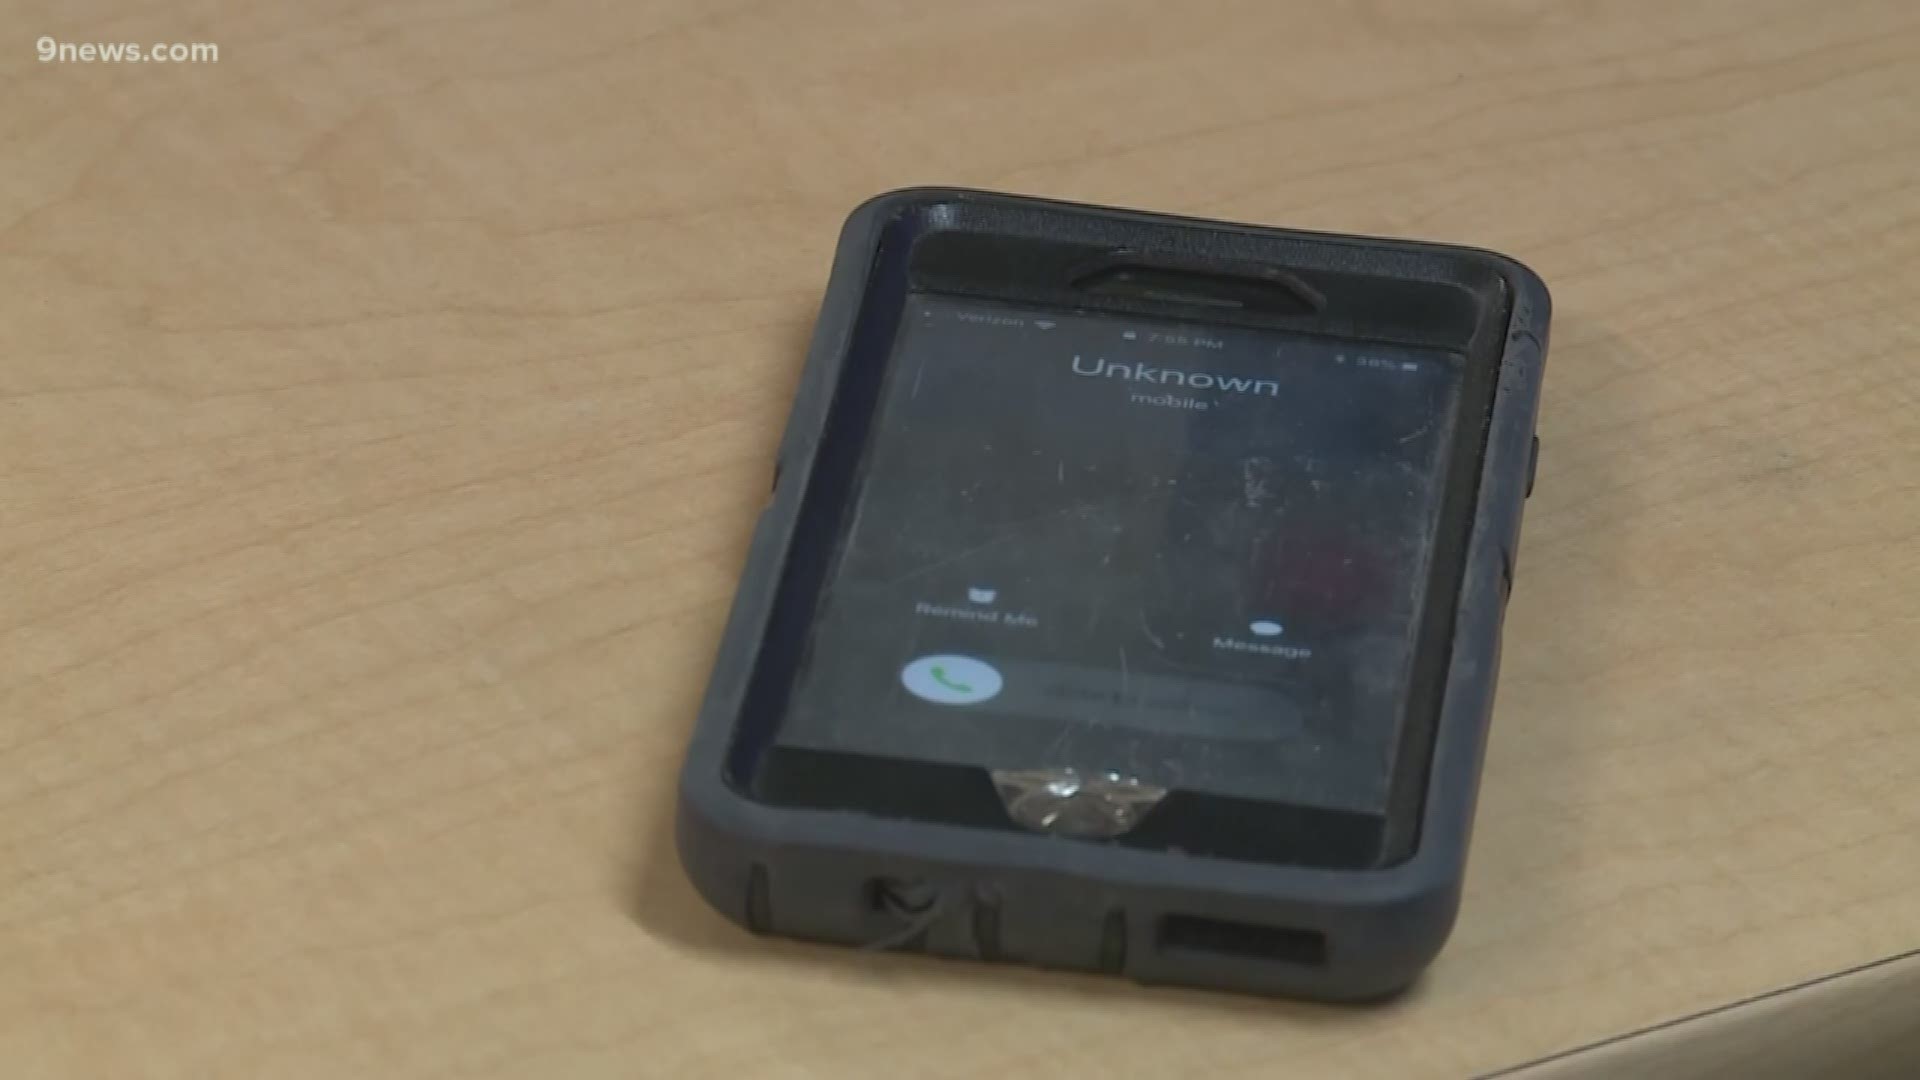 People in Colorado filed nearly 131,000 robocall complaints, the study shows.